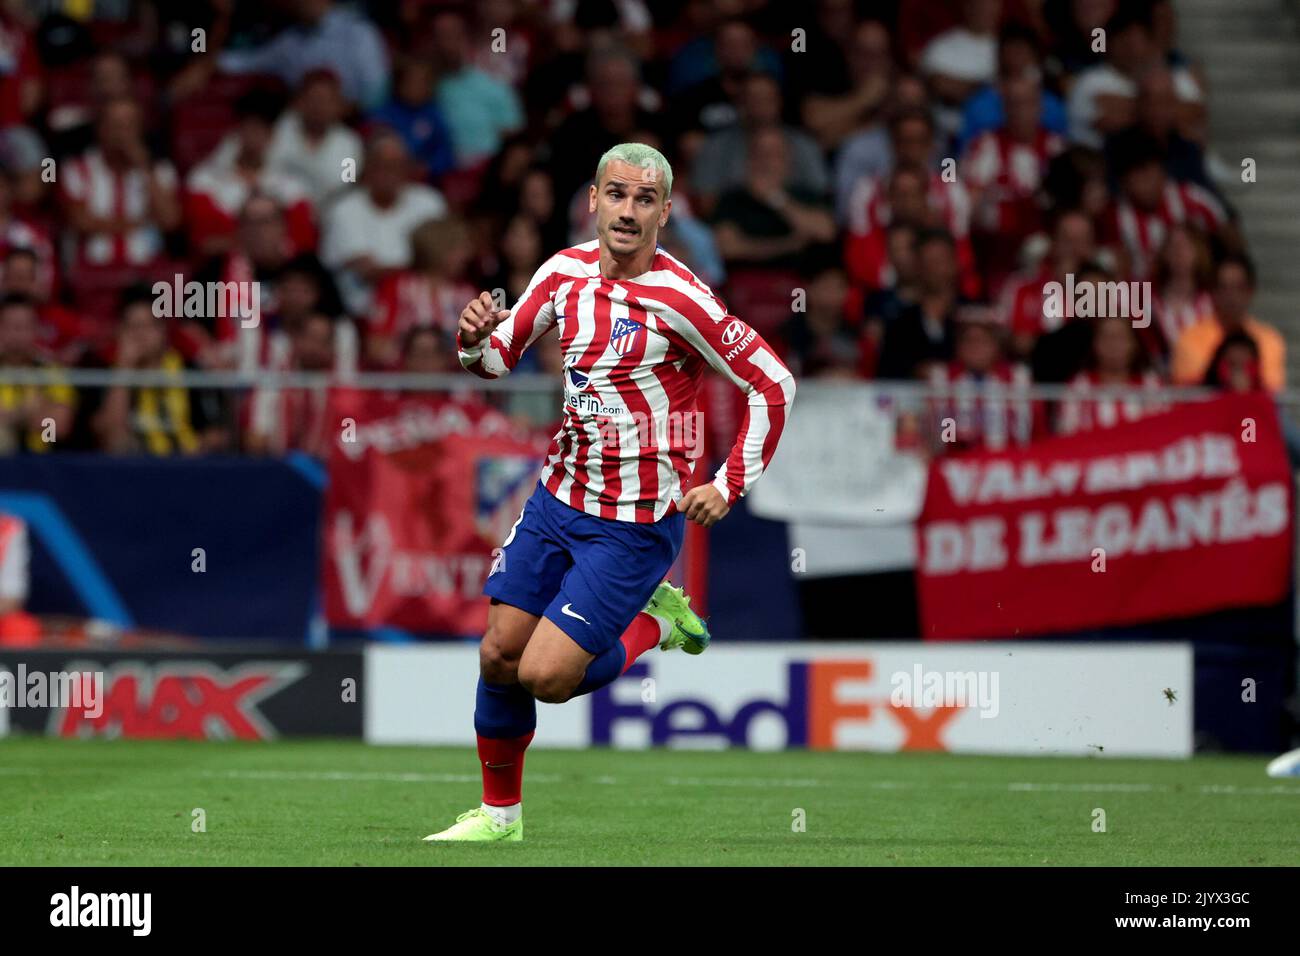 Madrid, Spanien. 07th Sep, 2022. Madrid, Spain: 07.09.2022.- Antonie Griezmann Atletico de Madrid vs Porto Champions League group stage matchday 1 of 6. Held at the Civitas Metropolitano stadium in the Spanish capital. Atletico wins 2-1 goals from Mario Hermoso 90 1 and Antonie Griezmann 90 11  Porto goal scored by Mateus Uribe 90 6 (P) Credit: dpa/Alamy Live News Stock Photo